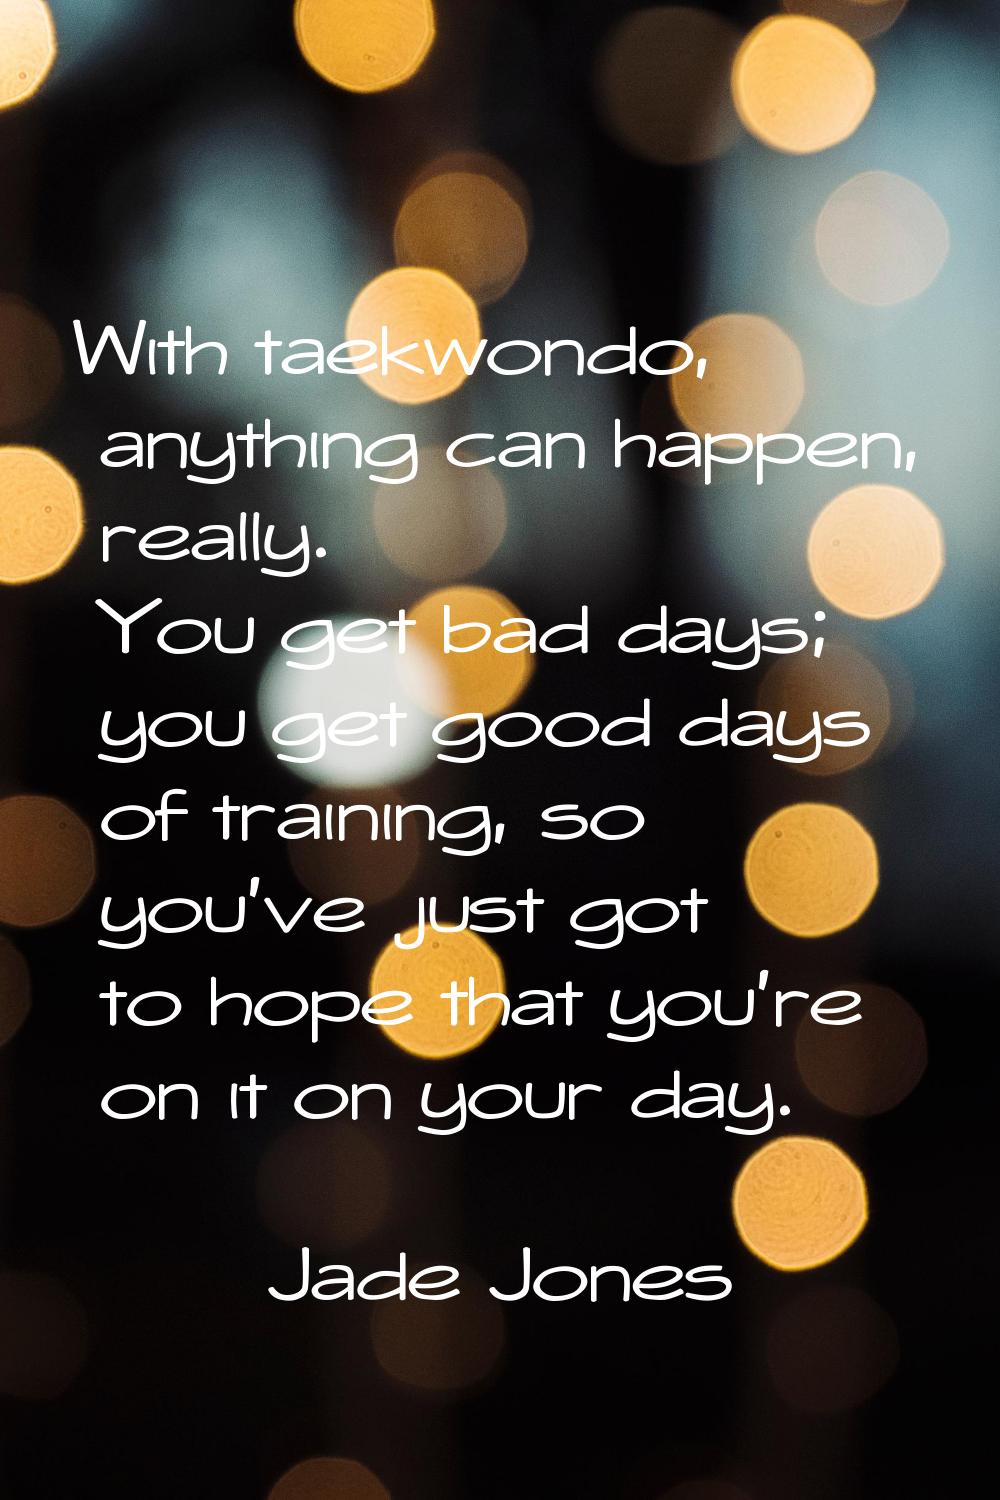 With taekwondo, anything can happen, really. You get bad days; you get good days of training, so yo